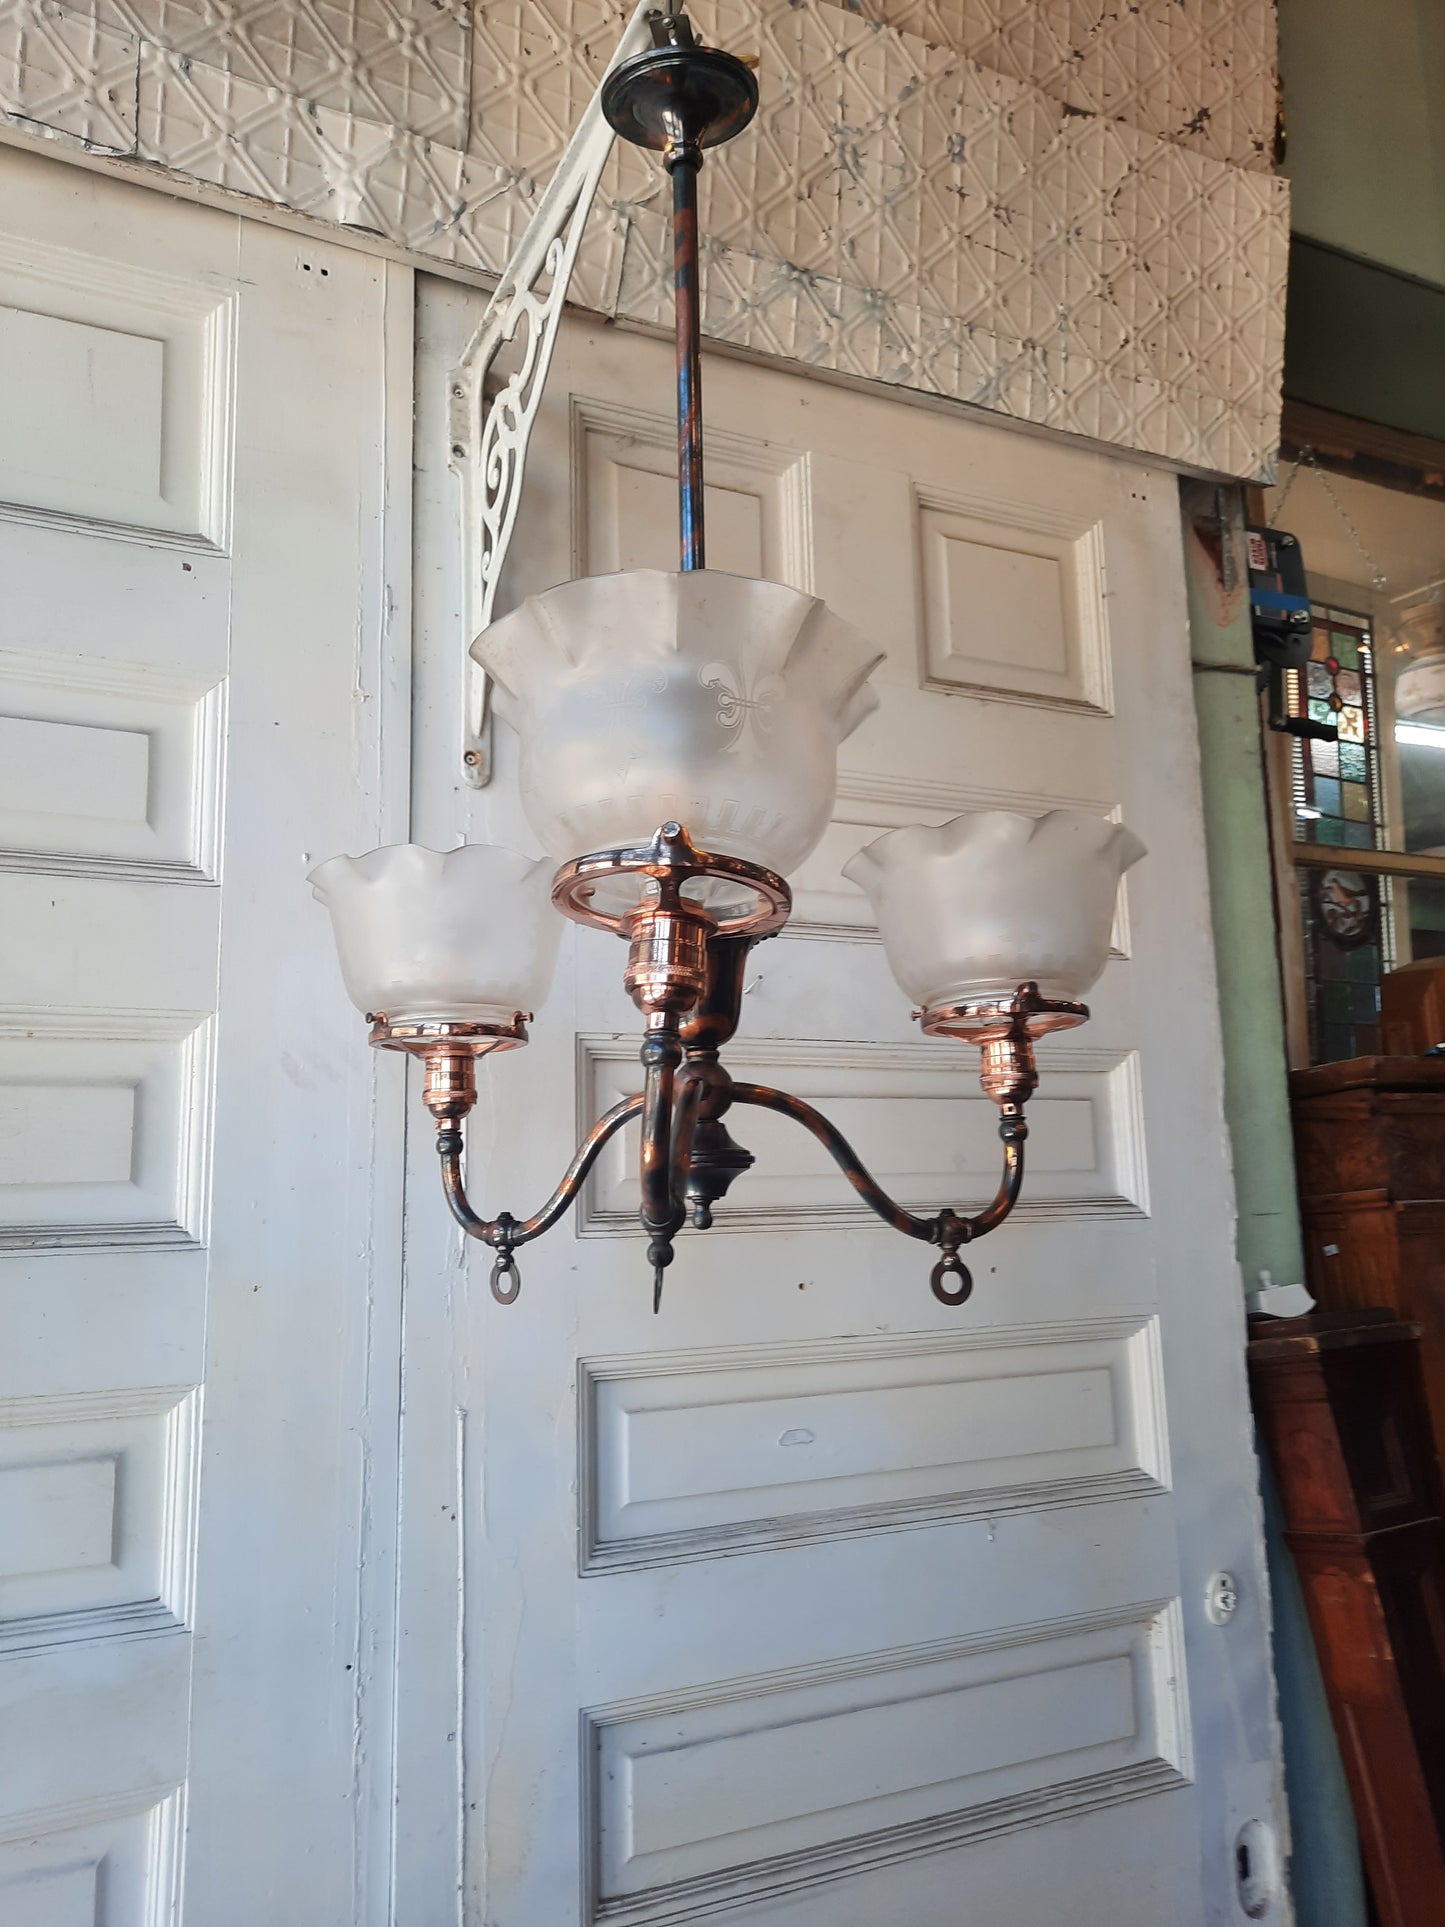 Victorian Converted Gas Chandelier with Copper Japanned Finish, Japanned Brass Antique Gas Ceiling Light